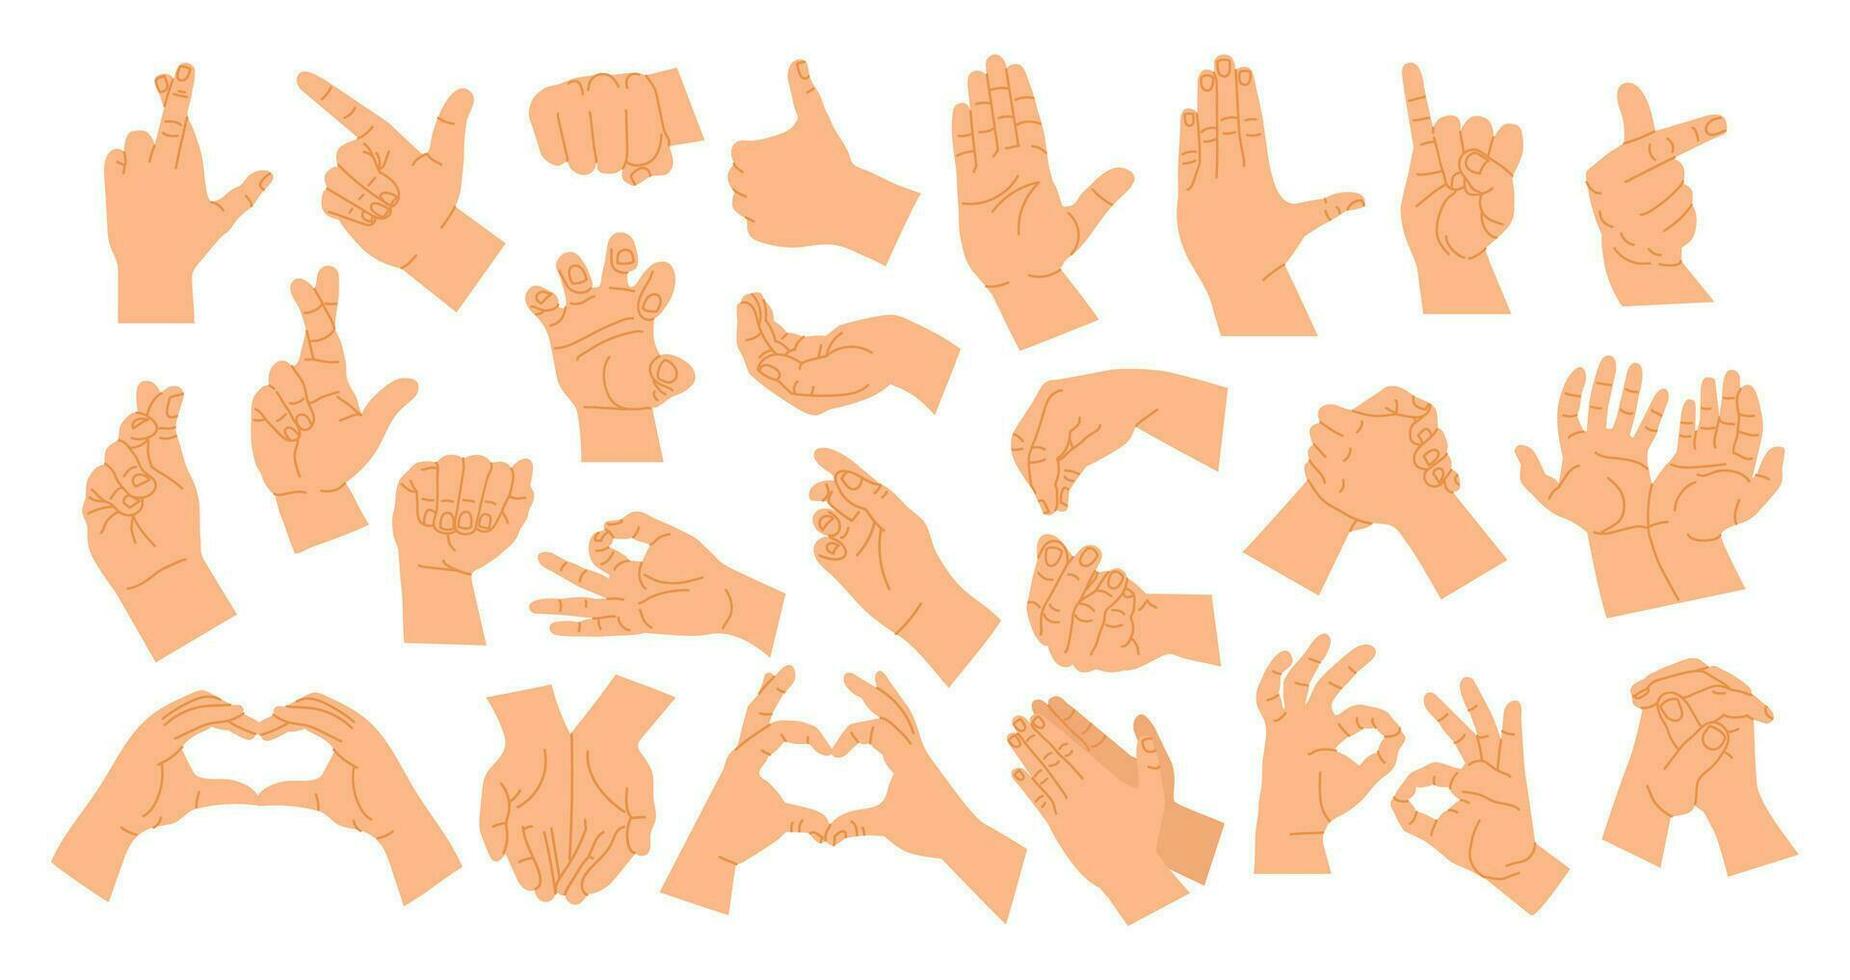 Hand gestures poses. Cartoon human hands showing different signs. Fingers and palm gesture. Showing position stop, heart, fist, pose with forefinger, various arm vector illustration